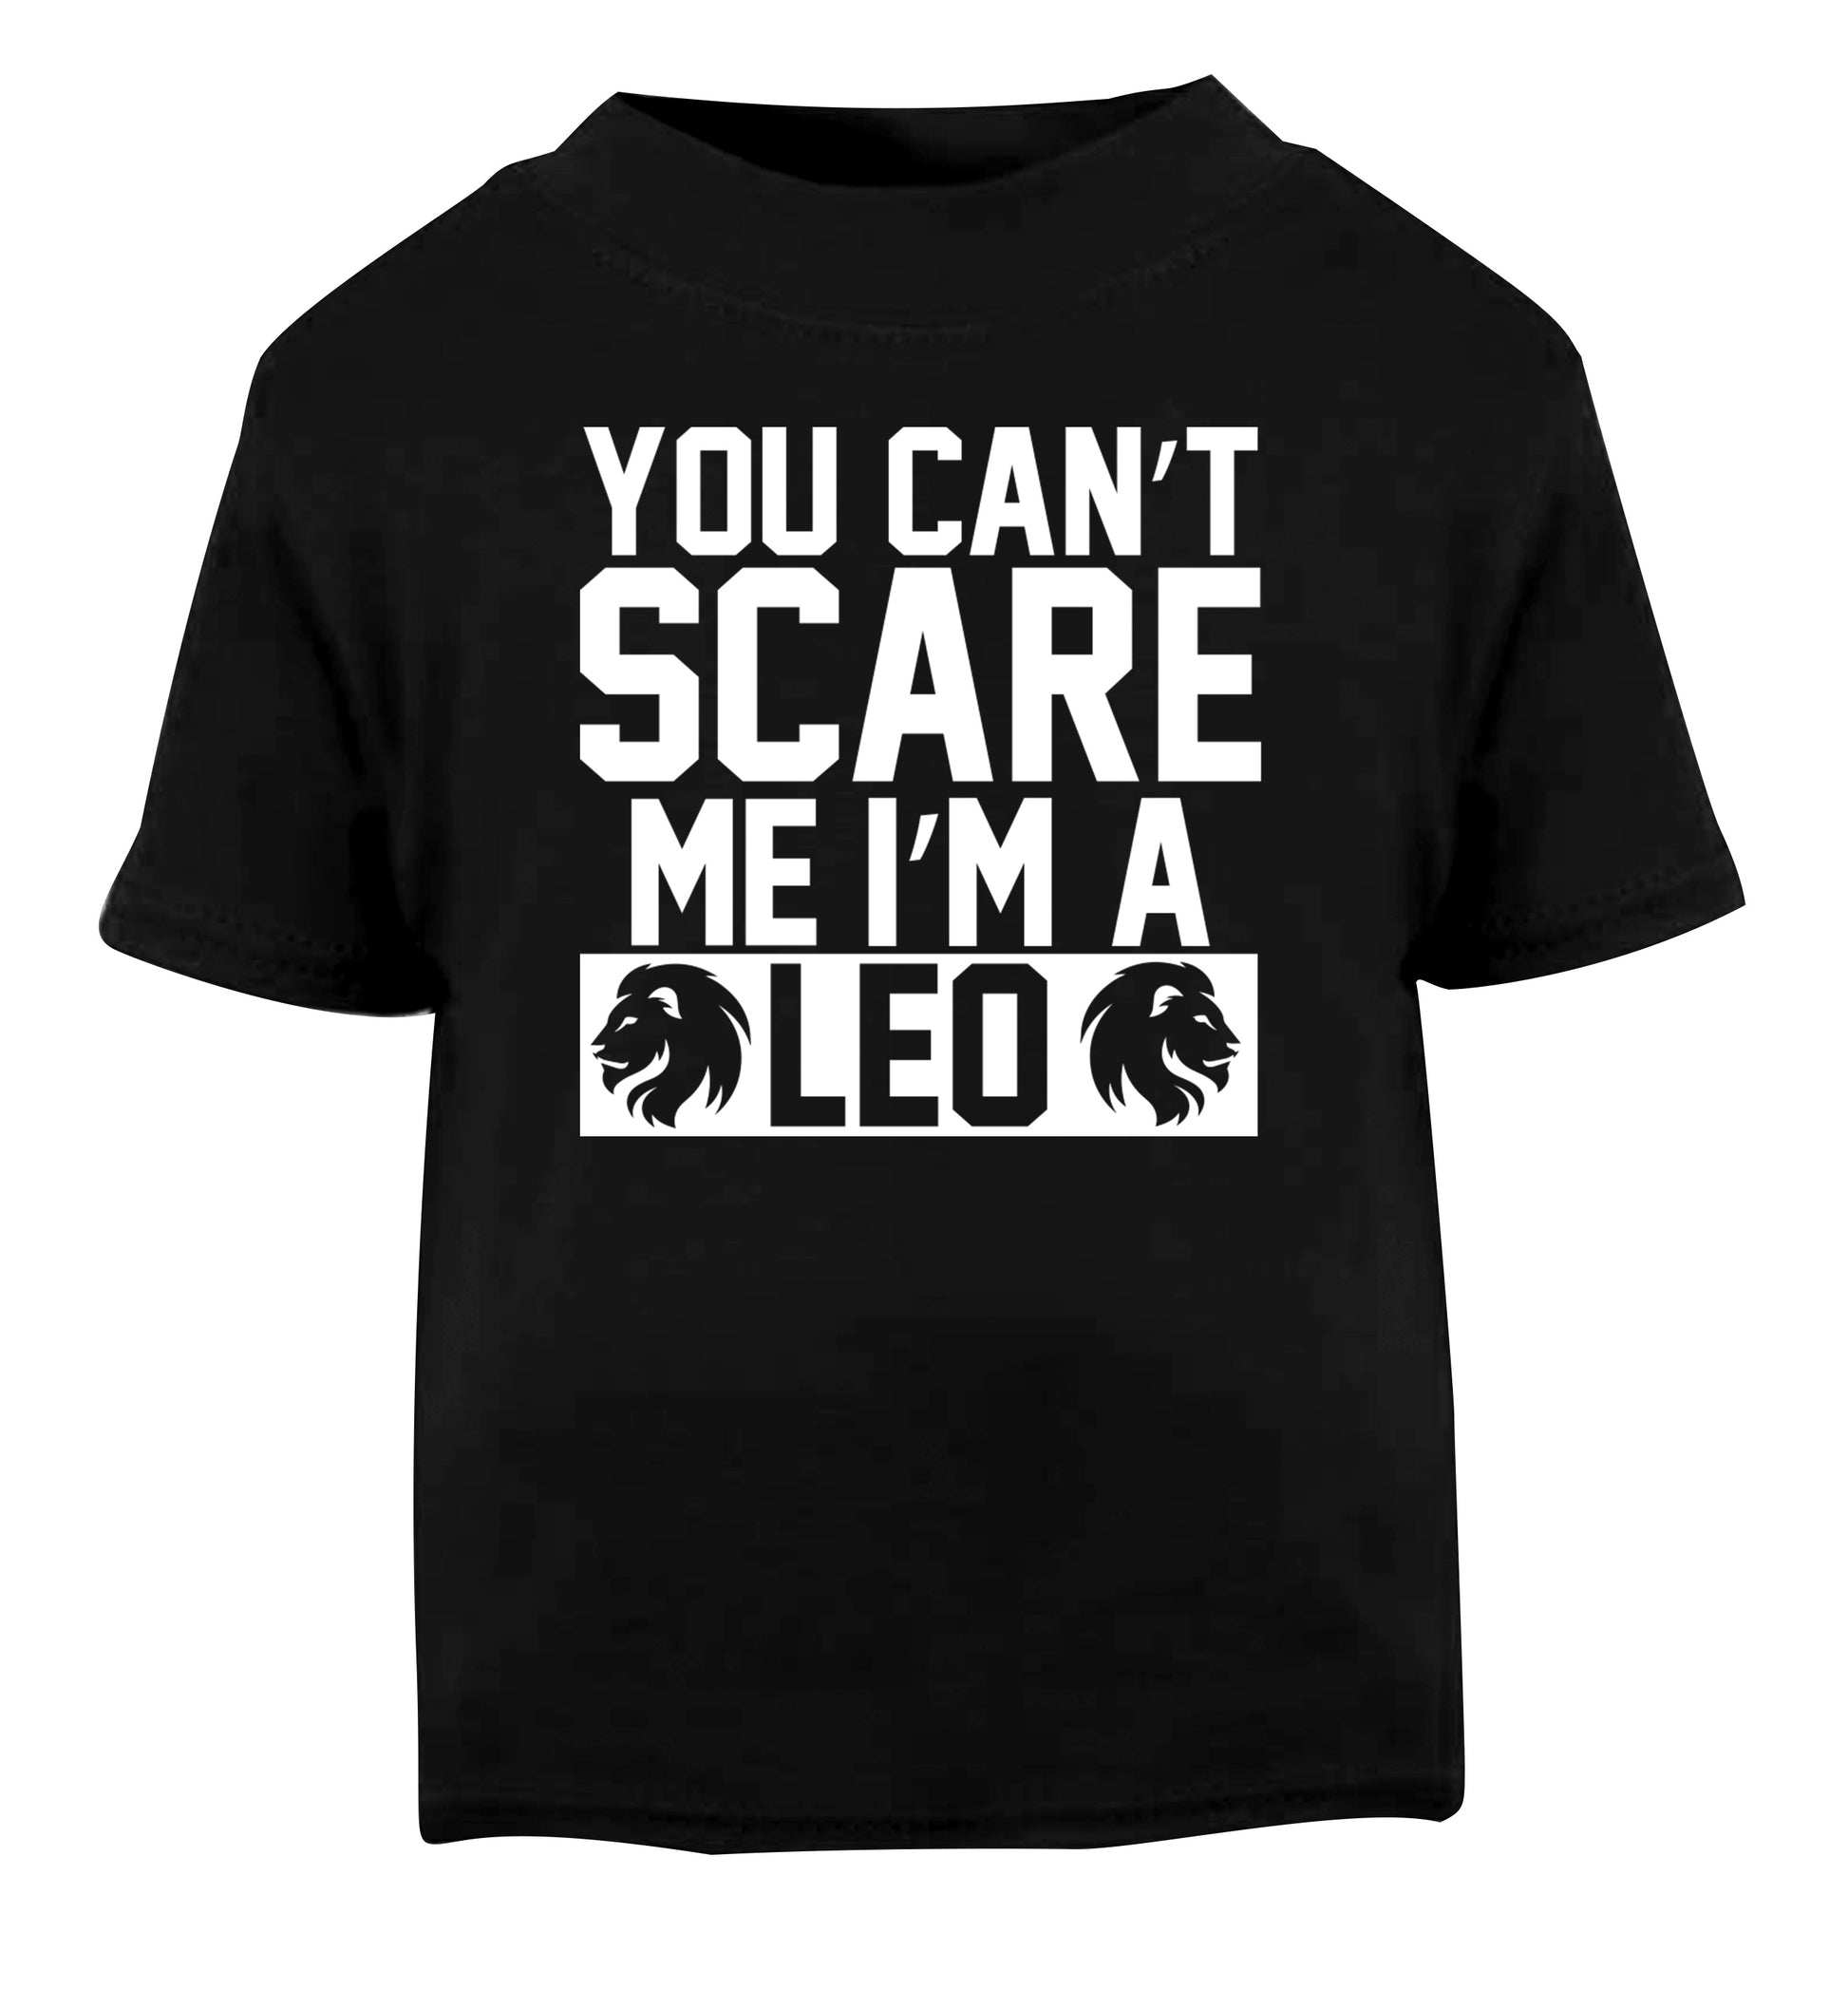 You can't scare me I'm a leo Black Baby Toddler Tshirt 2 years